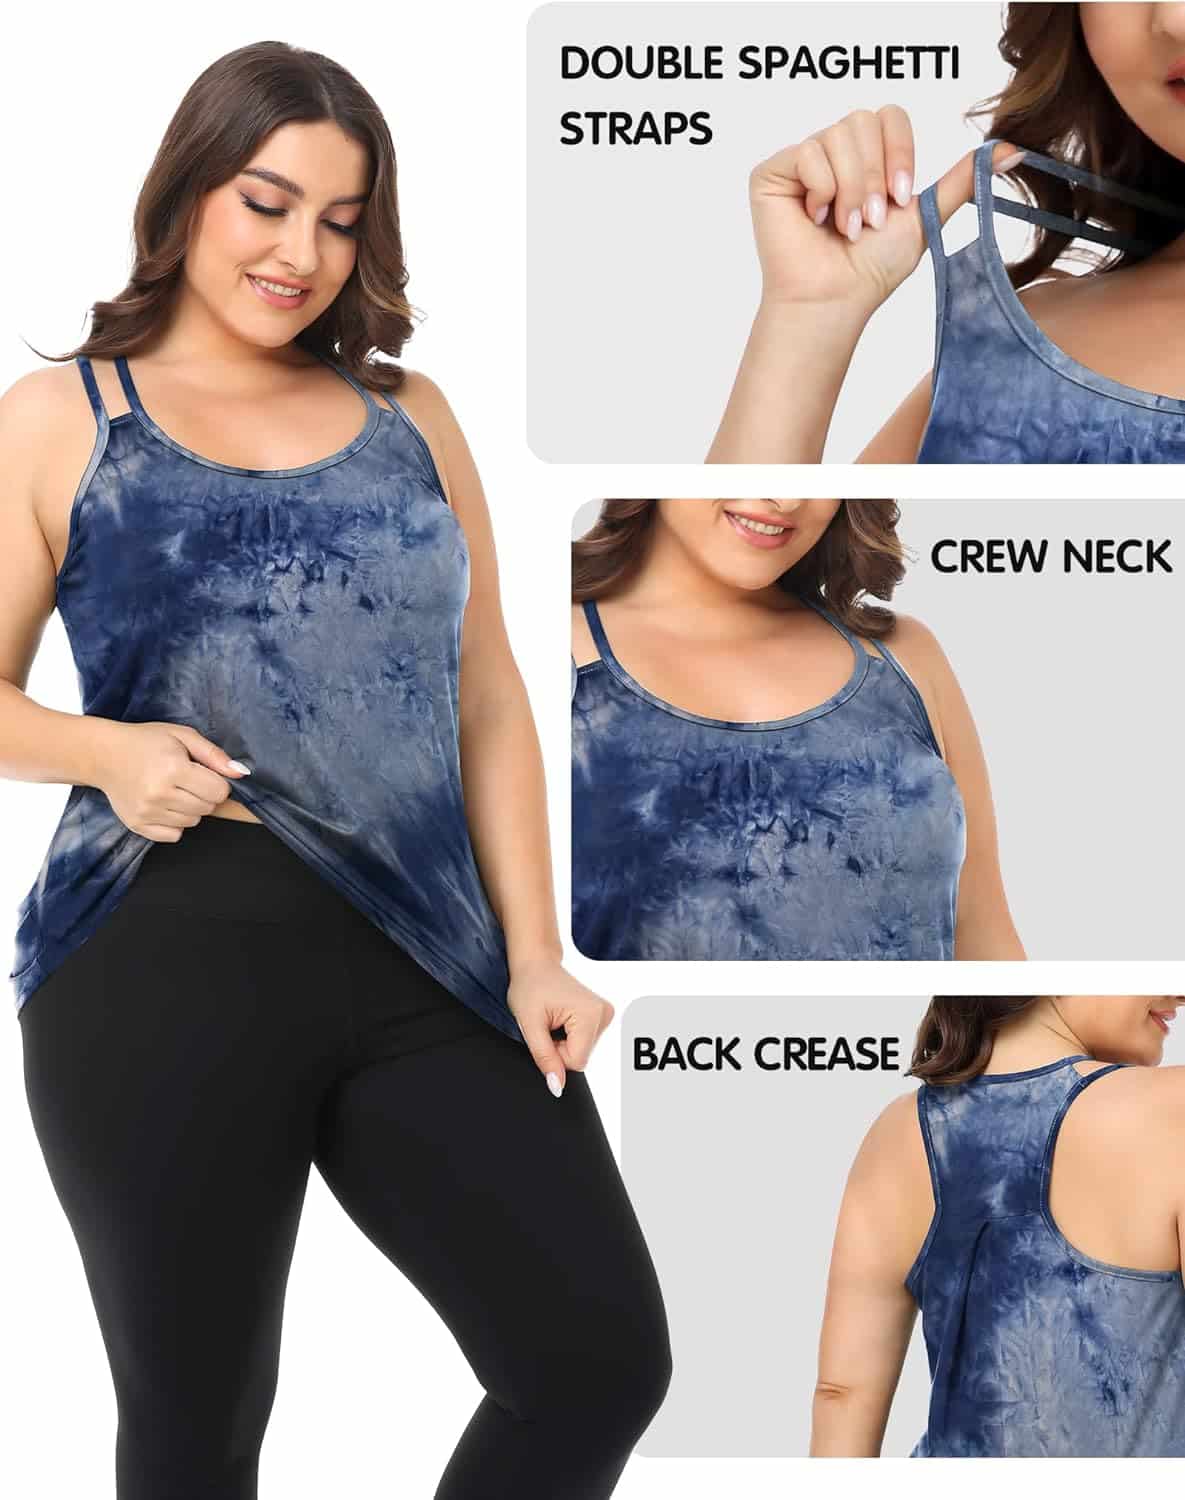 Foreyond Women's Plus Size Workout Tank Tops: A Stylish and Comfortable Choice for Active Women